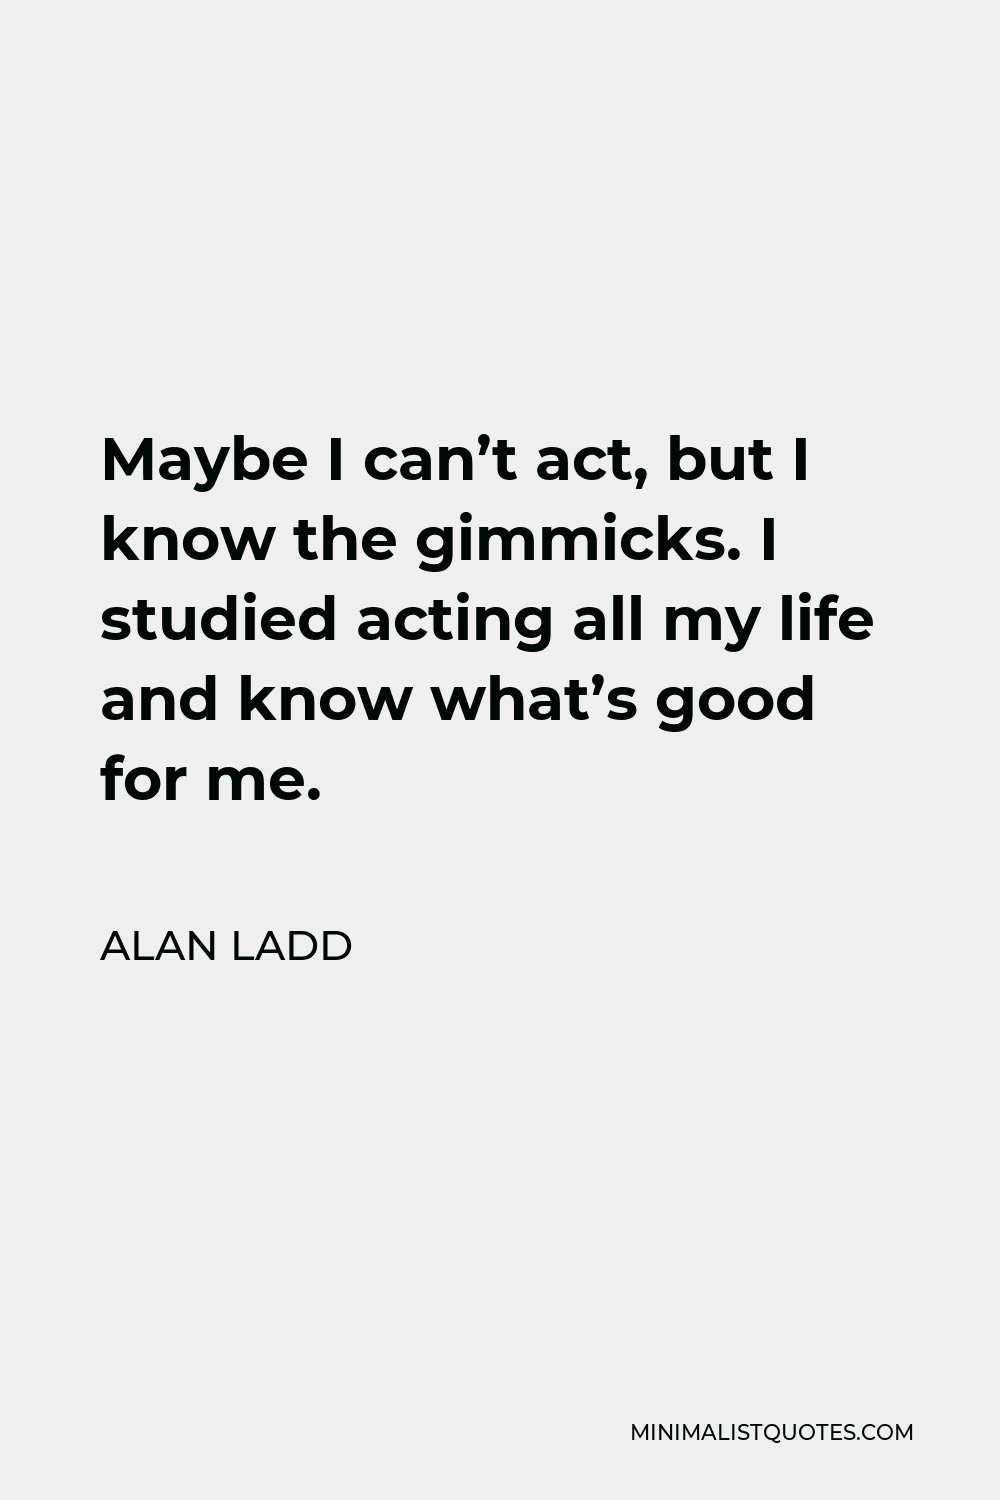 Alan Ladd Quote - Maybe I can’t act, but I know the gimmicks. I studied acting all my life and know what’s good for me.